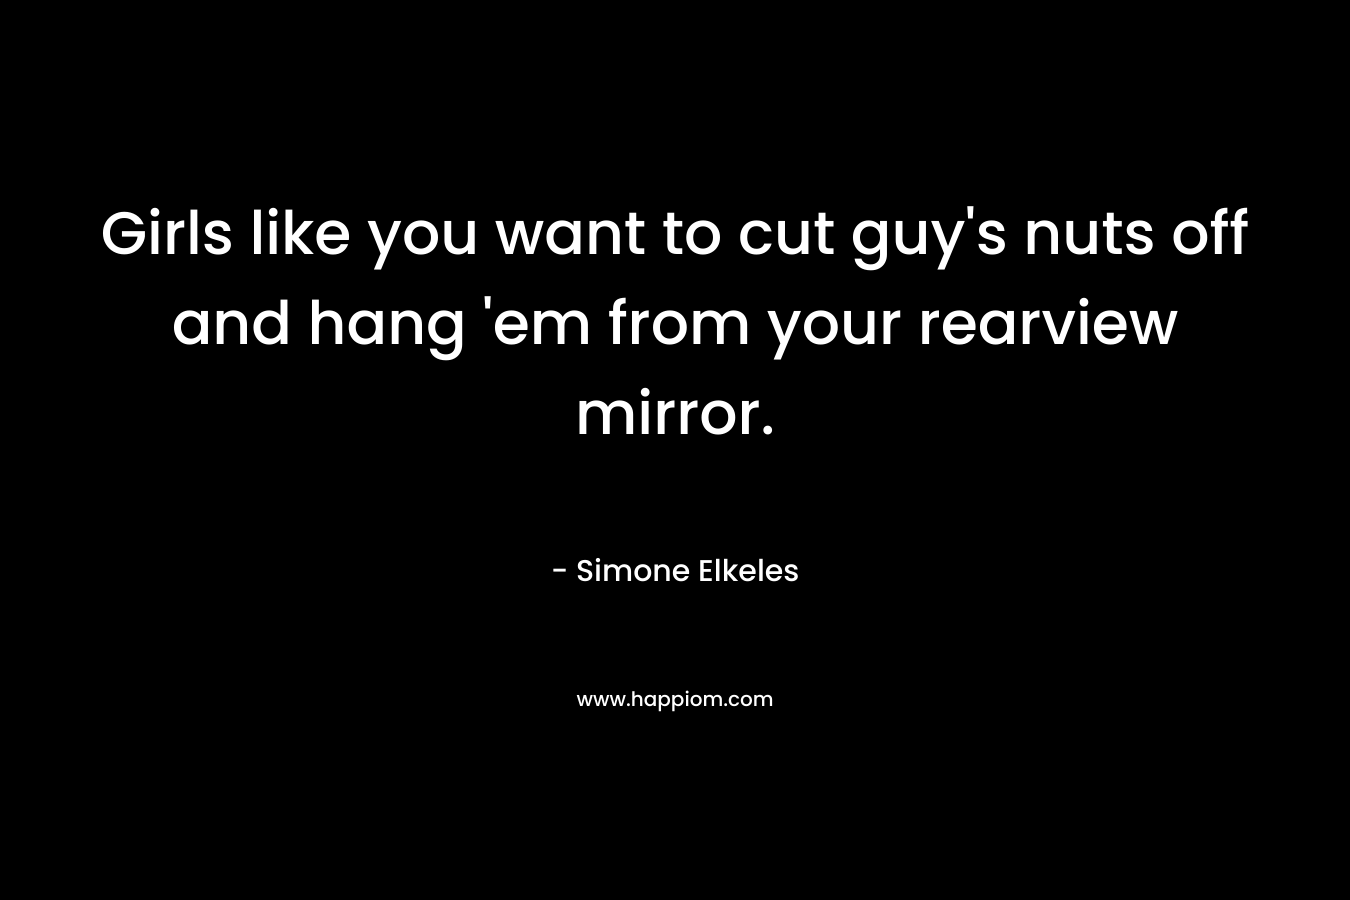 Girls like you want to cut guy’s nuts off and hang ’em from your rearview mirror. – Simone Elkeles